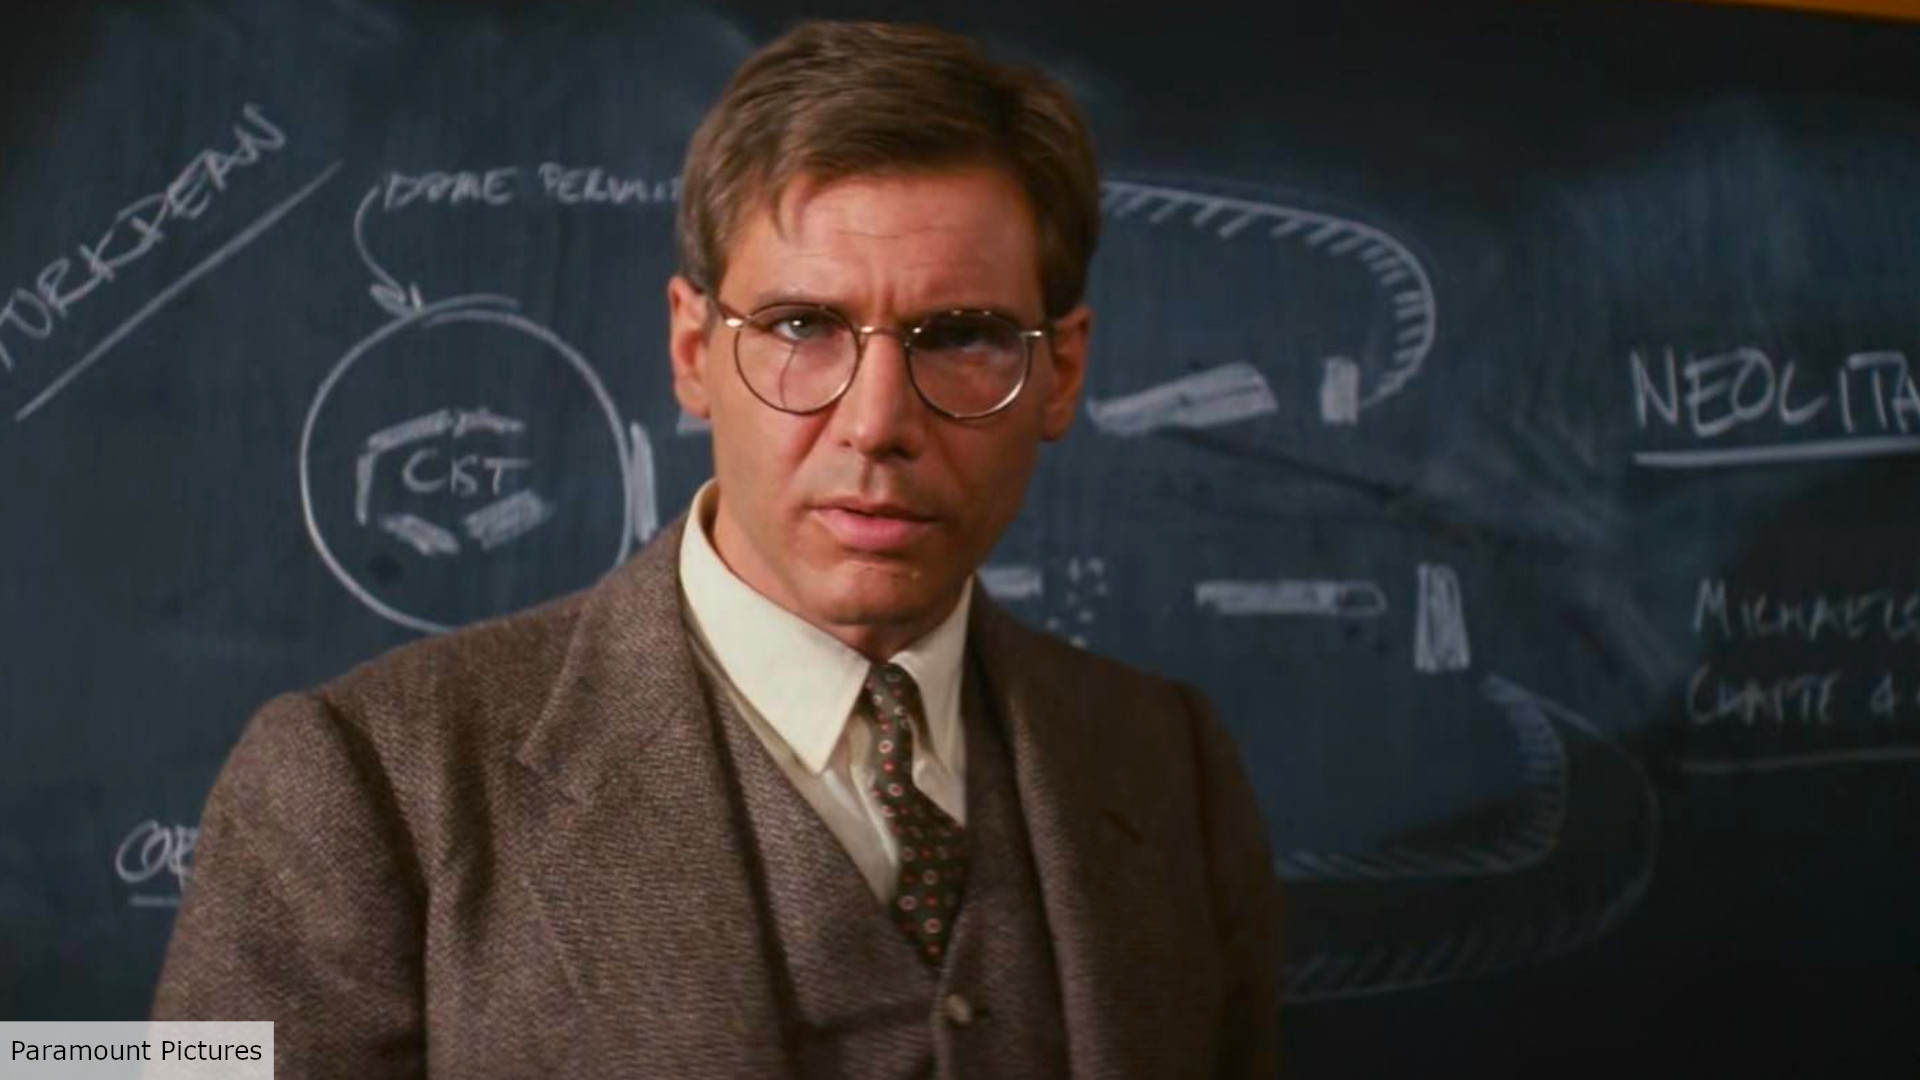 Harrison Ford rewrote the script for one of his underrated best movies